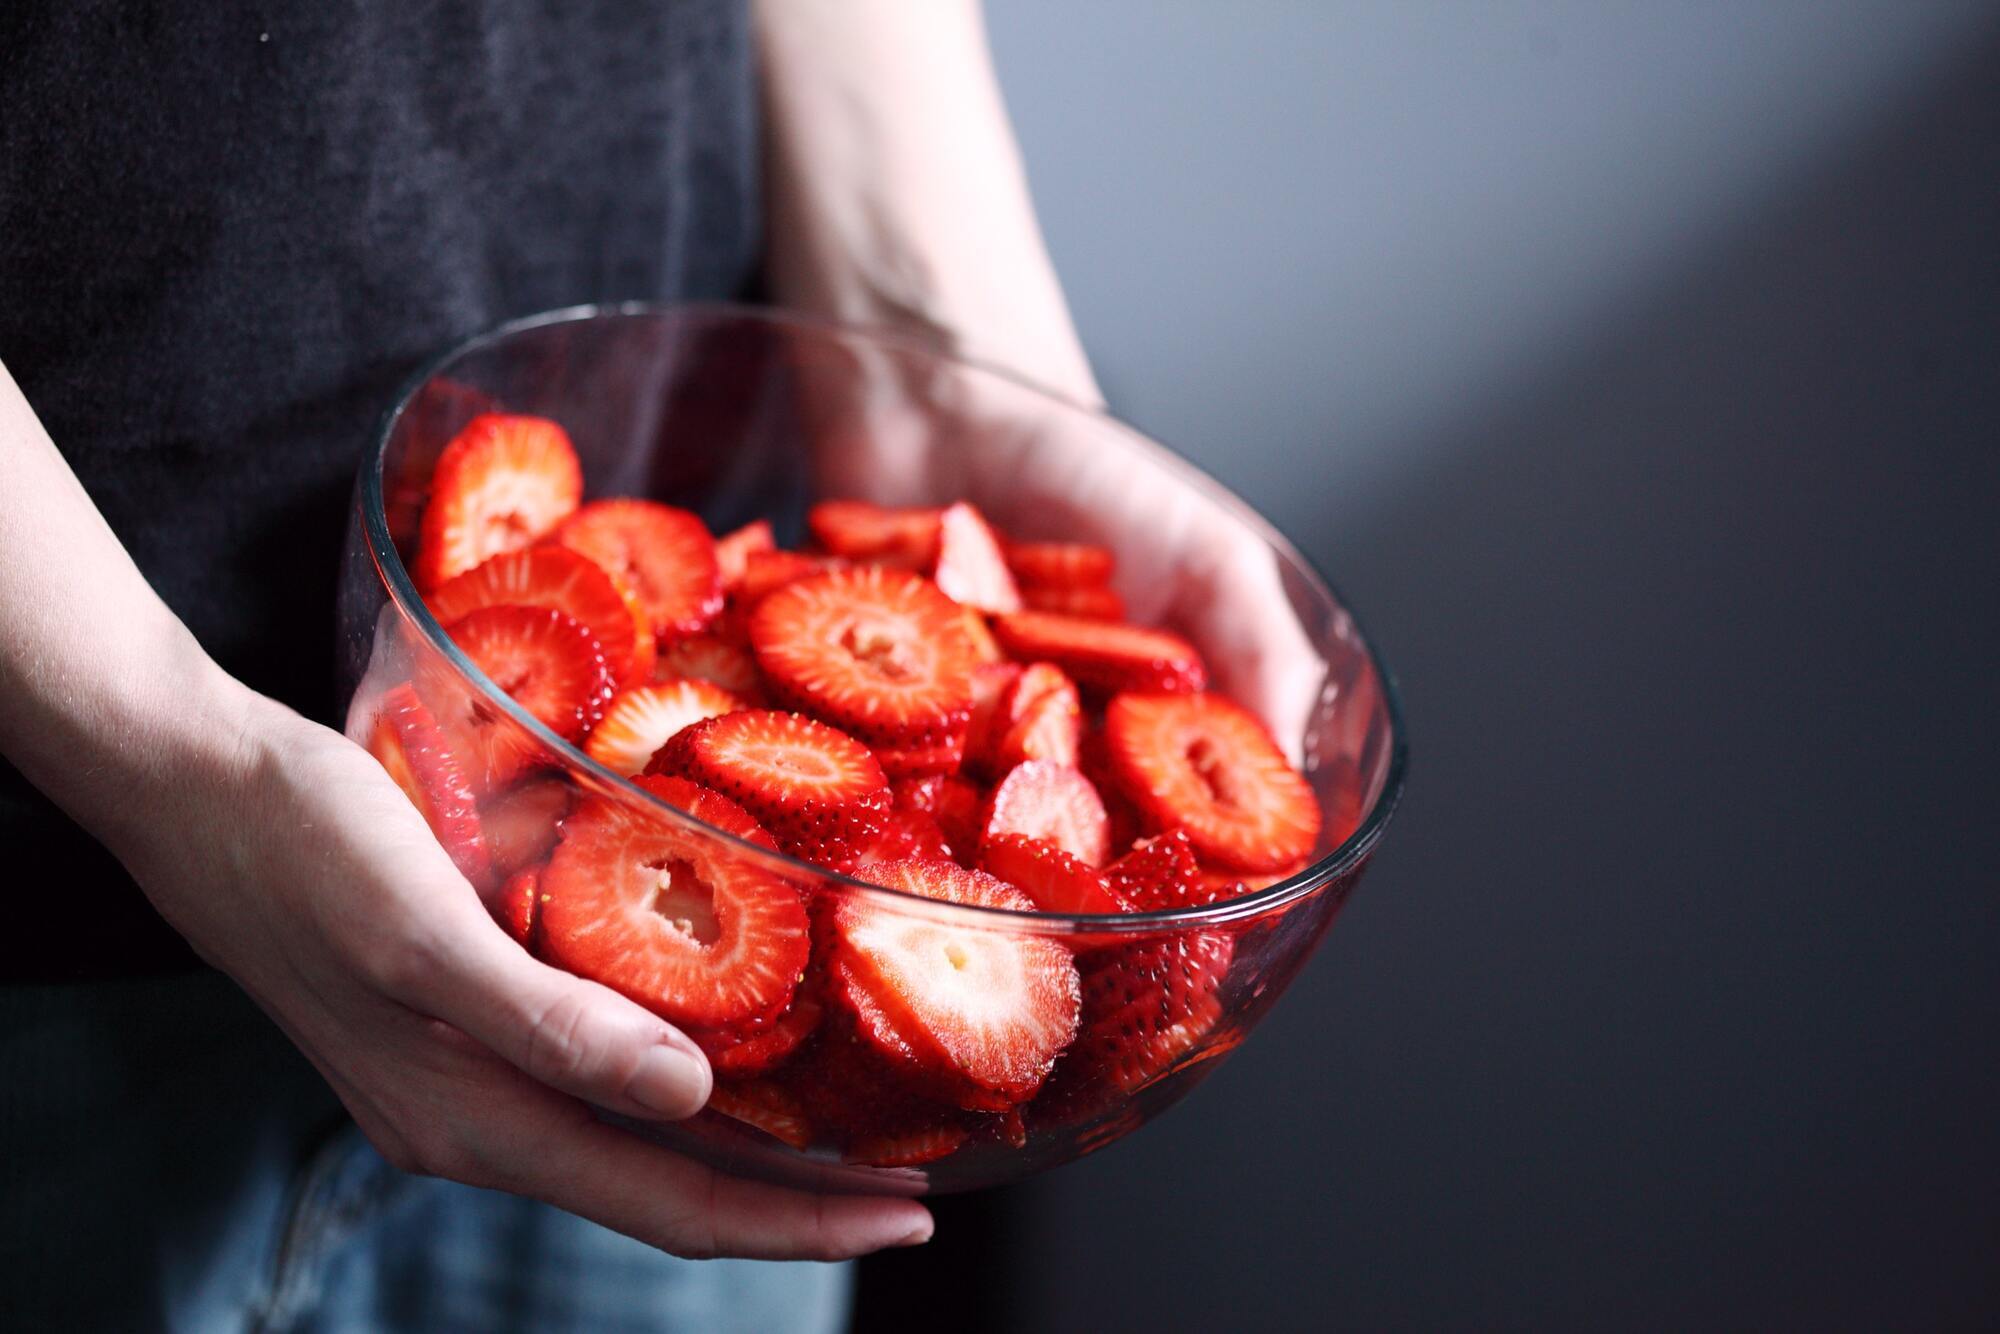 Strawberries for the filling